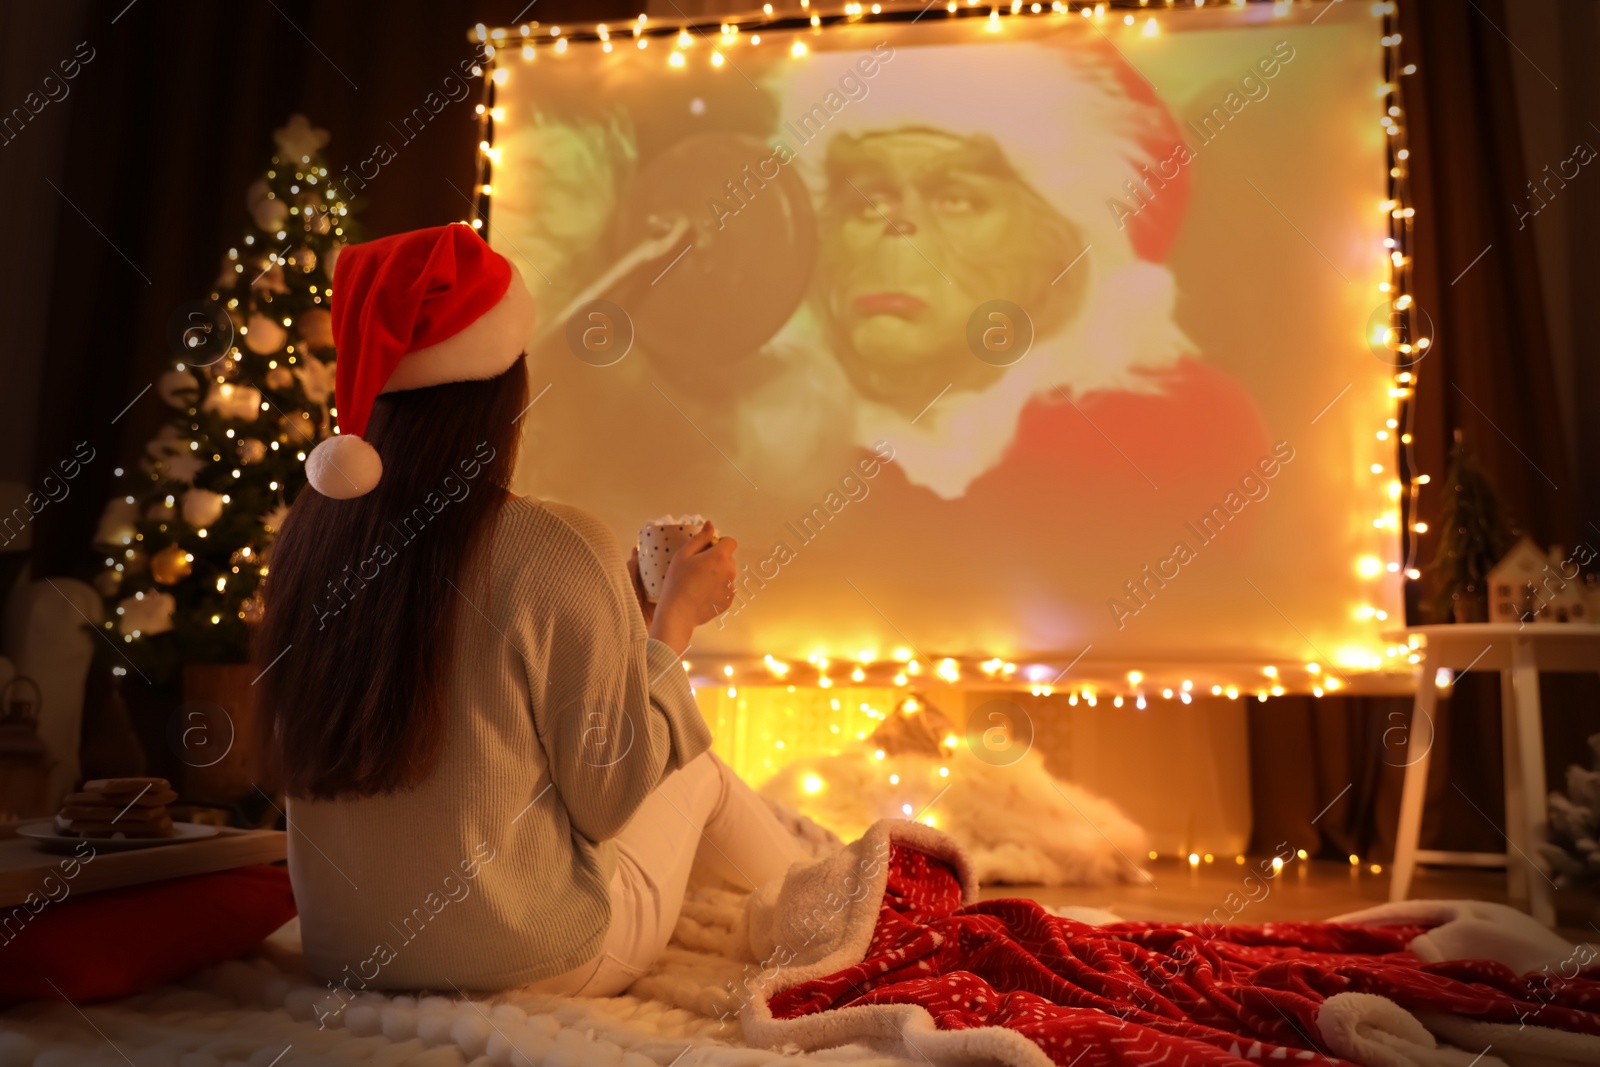 Photo of MYKOLAIV, UKRAINE - DECEMBER 24, 2020: Woman watching The Grinch movie via video projector in room. Cozy winter holidays atmosphere